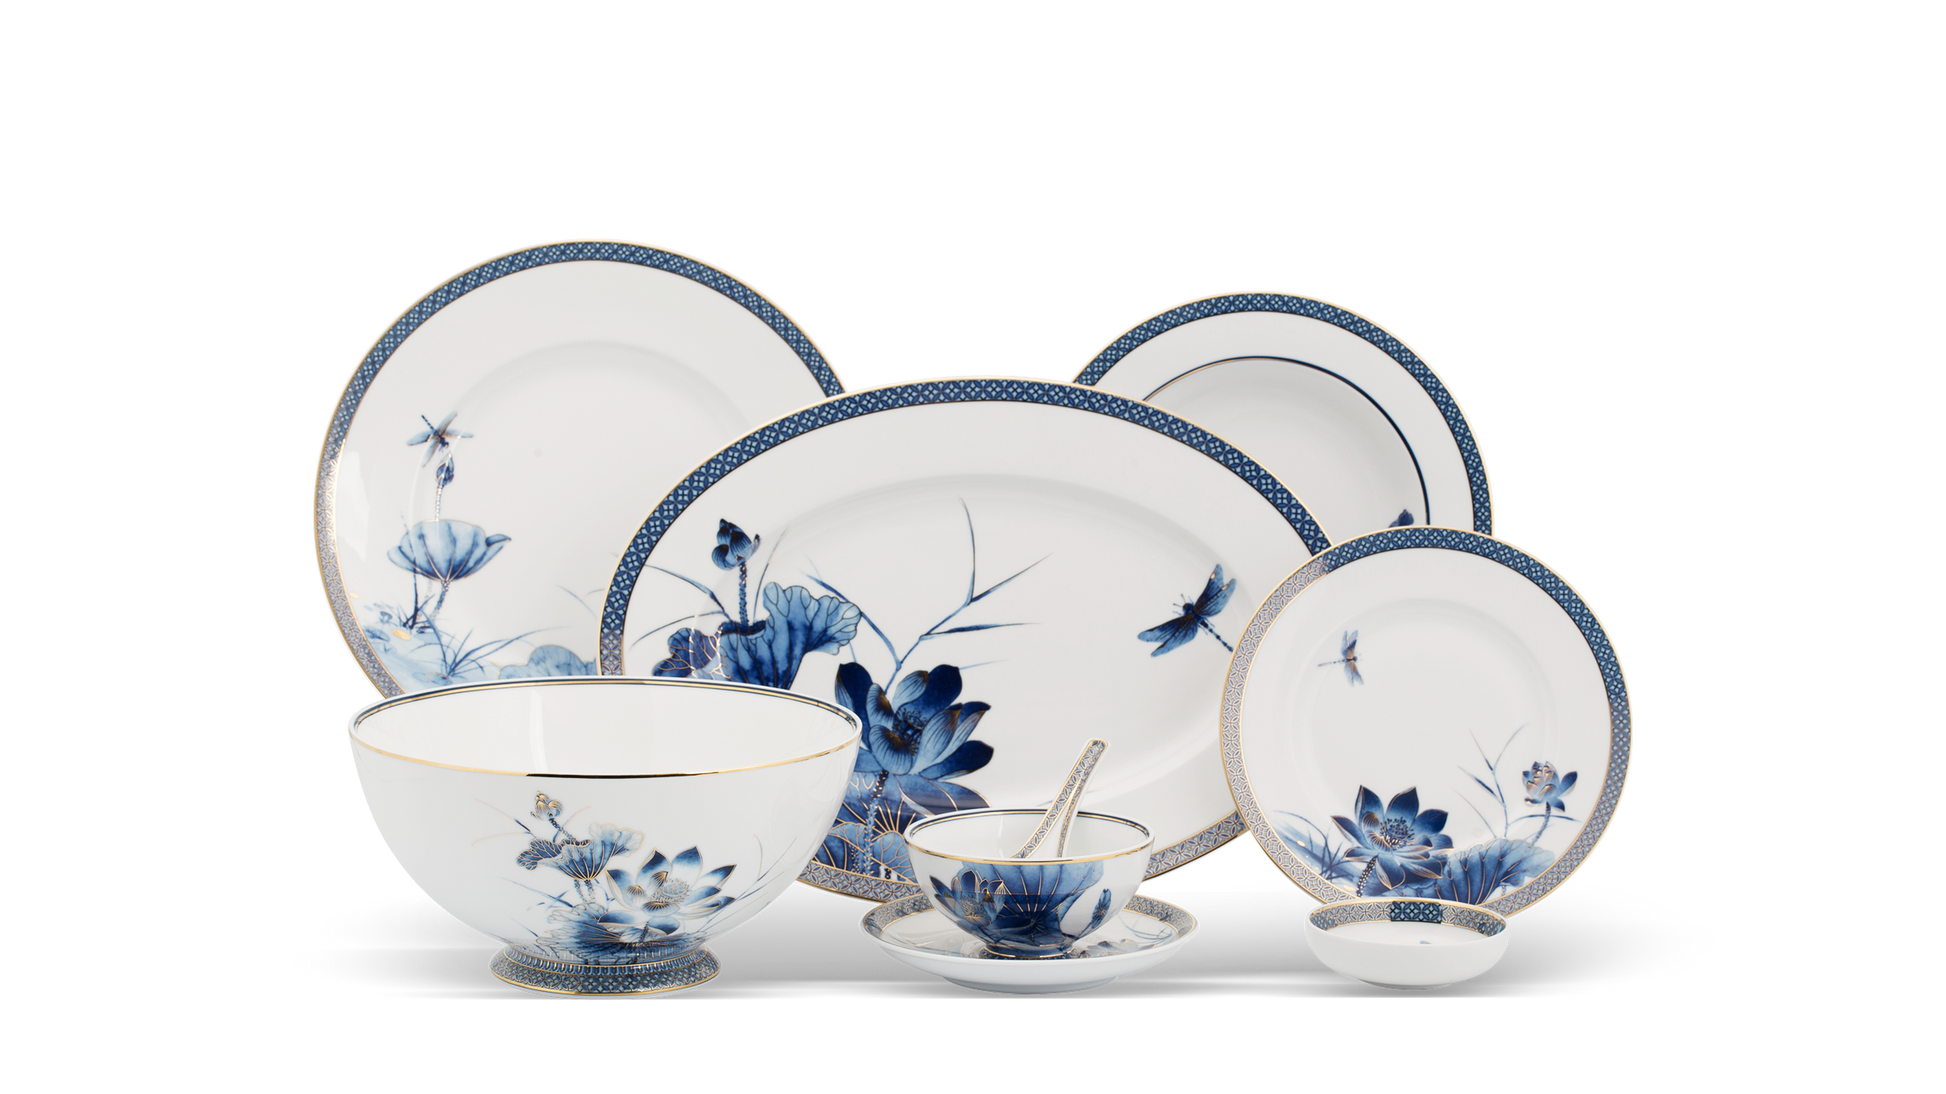 Golden Lotus Tableware Collection (4802822176868)